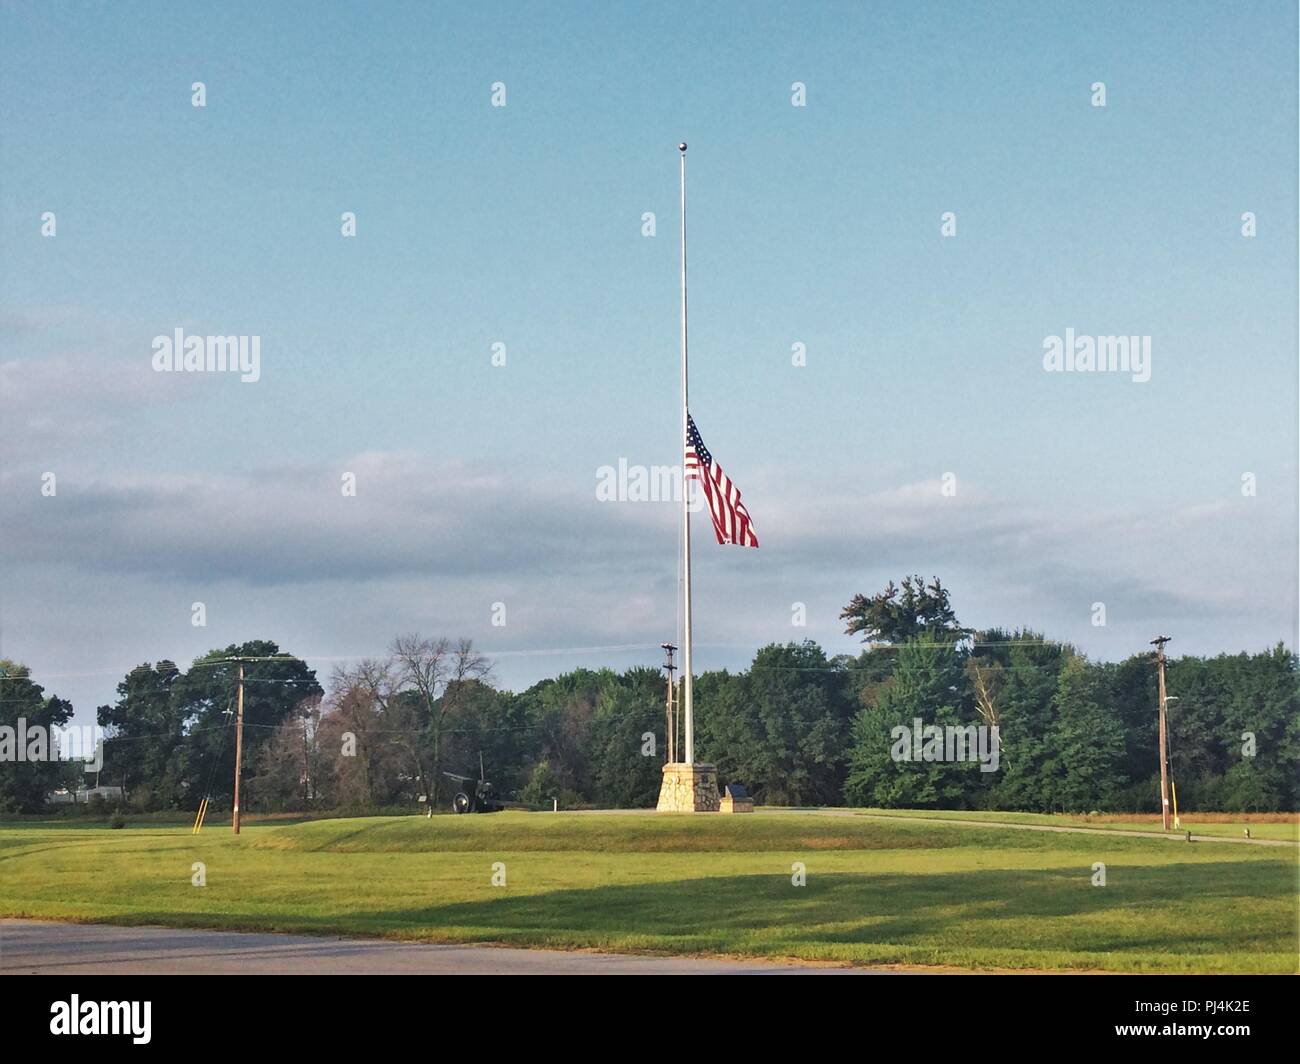 The United States flag flies at half-staff Aug. 28, 2018, at Fort McCoy, Wis., in honor of U.S. Senator John S. McCain III who died Aug. 25. McCain was an American politician and naval military officer who served as a United States Senator from Arizona from 1987 until his death. He previously served two terms in the United States House of Representatives and was the Republican nominee for President of the United States in the 2008 election. According to johnmccain.com, McCain was the son and grandson of distinguished Navy admirals and he graduated from the Naval Academy in 1958. He served as a Stock Photo